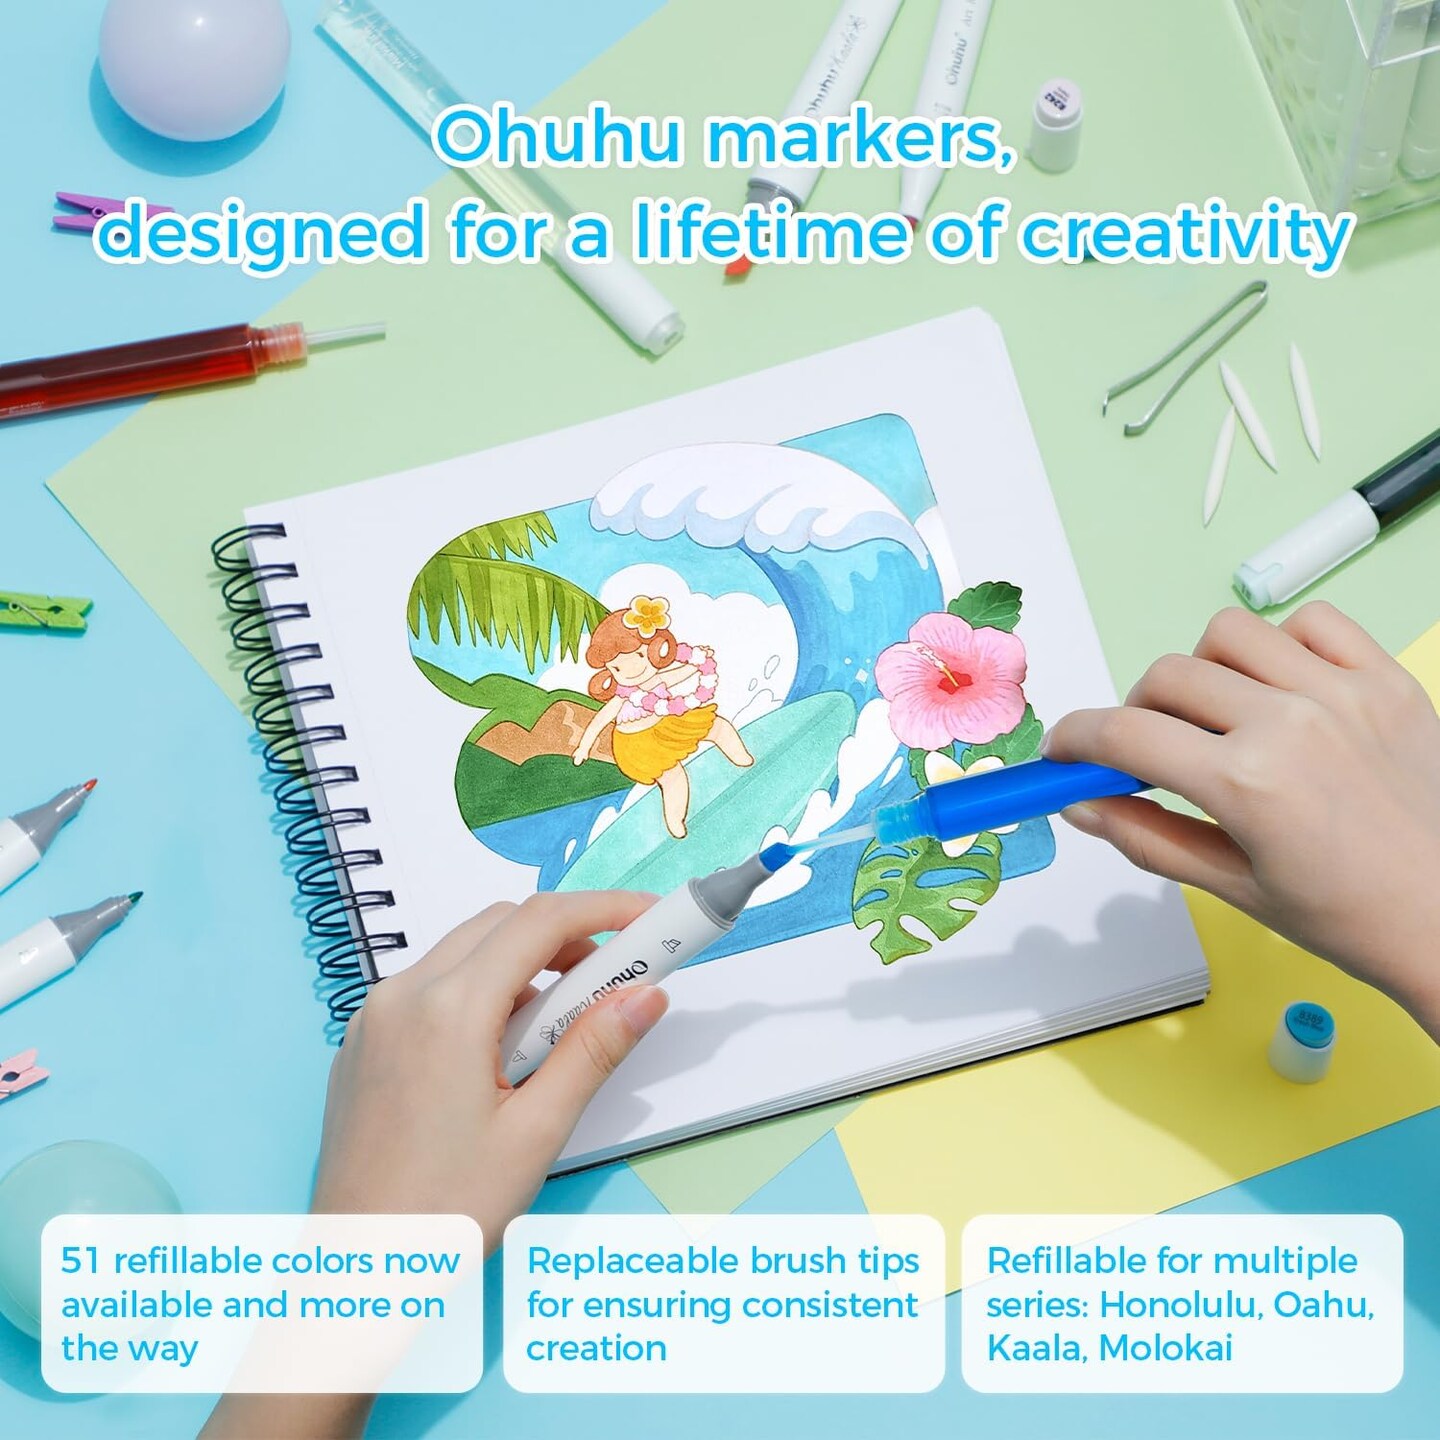 Ohuhu Alcohol Markers - Double Tipped Art Marker Set for Artist Adults&#x27; Coloring Sketching Illustration - 60 Colors - Chisel &#x26; Fine Dual Tips - Refillable Ink - Oahu Series of Ohuhu Markers